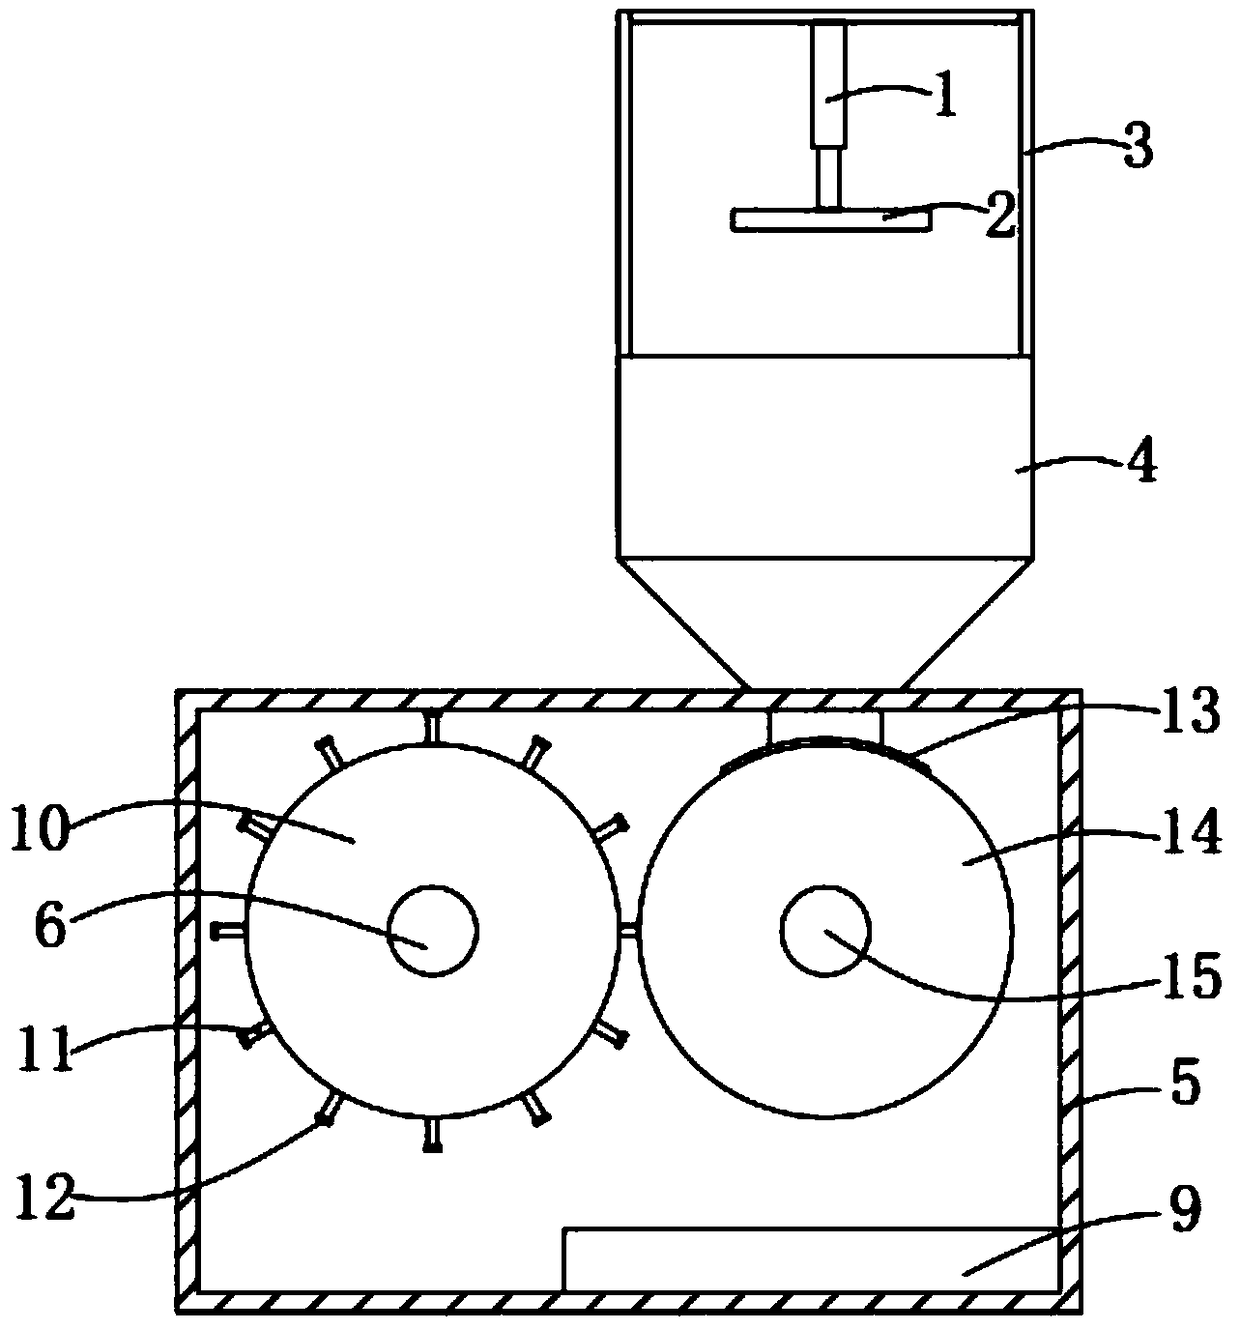 Granulation device for straw recycling